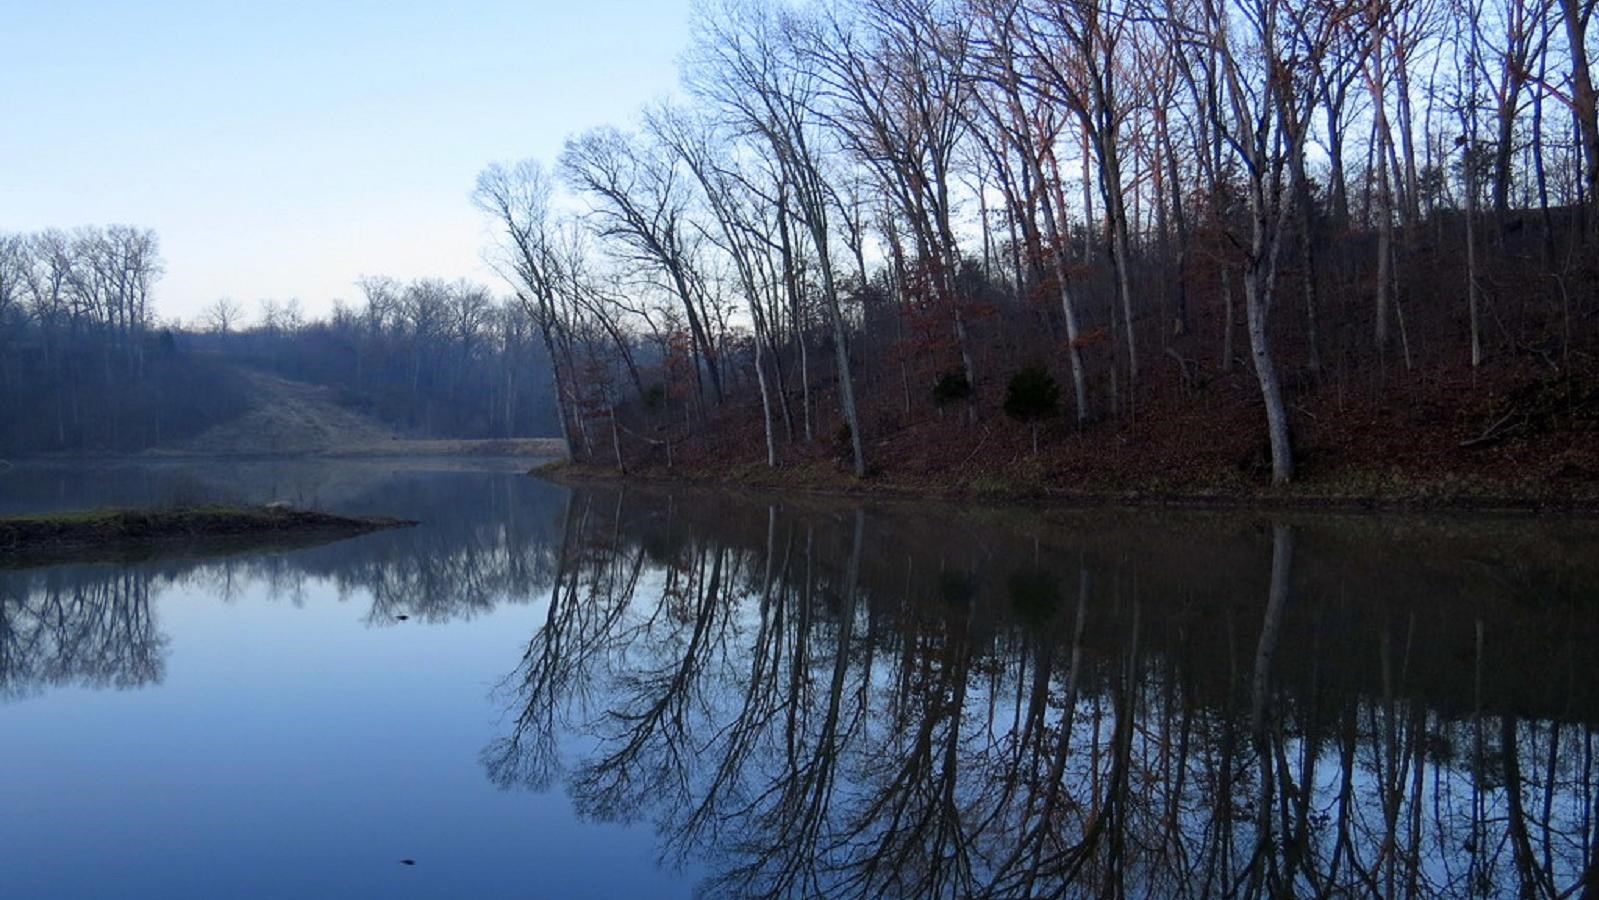 Leafless trees reflected on a the calm surface of a lake